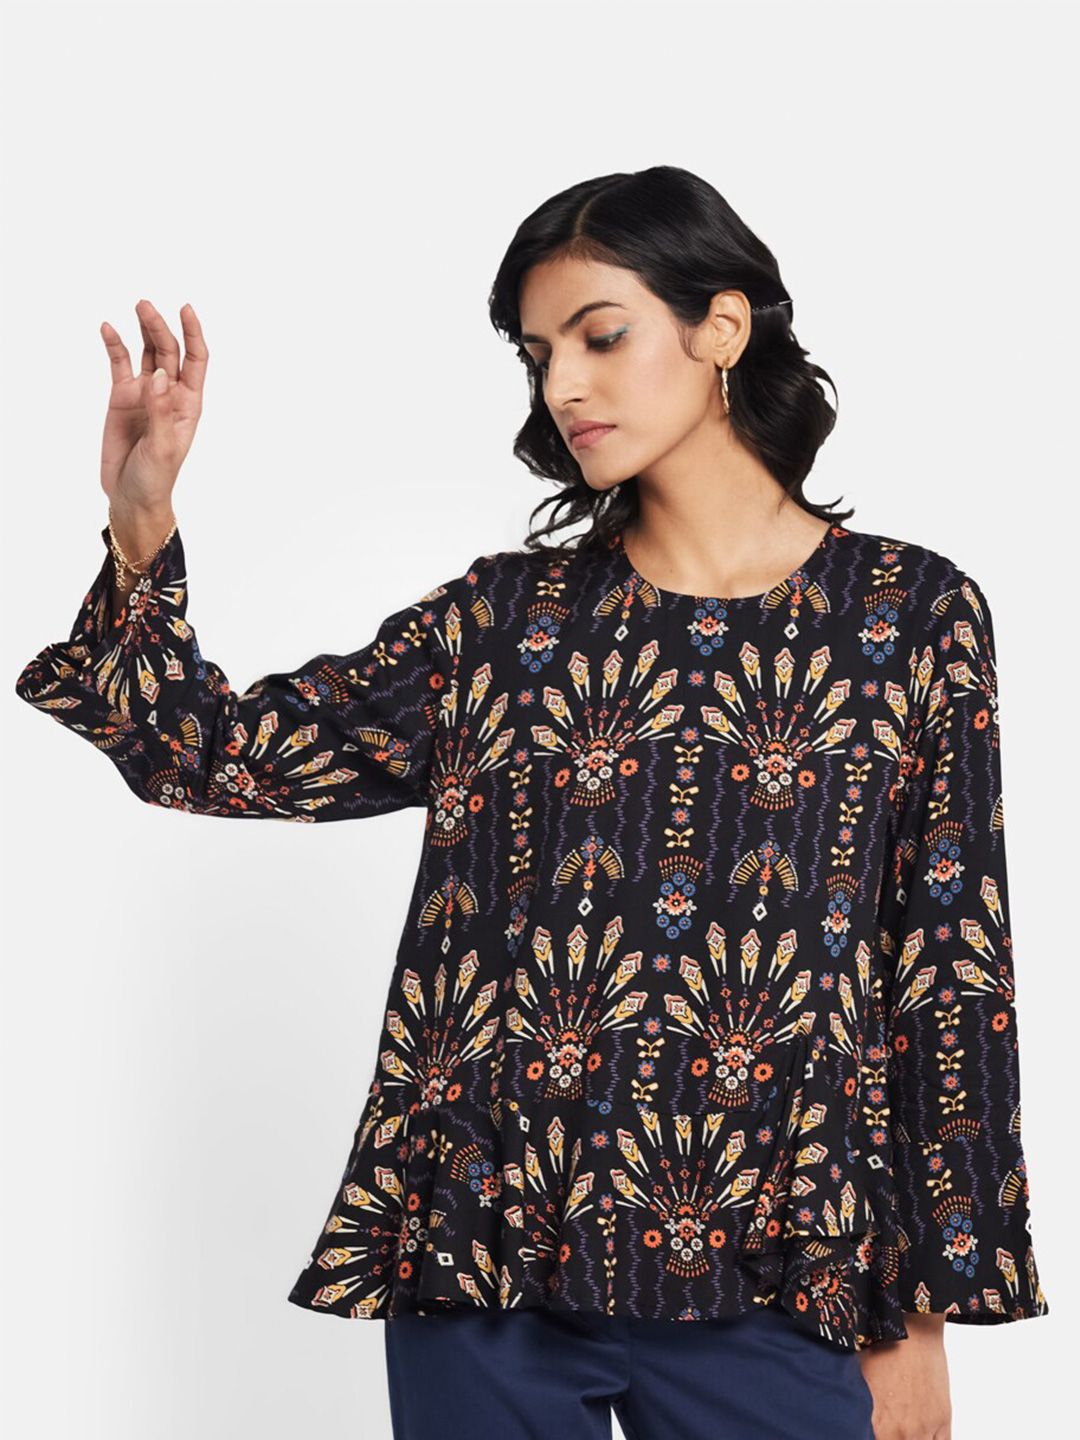 Fabindia Ethnic Motif Printed A-Line Cotton Top Price in India